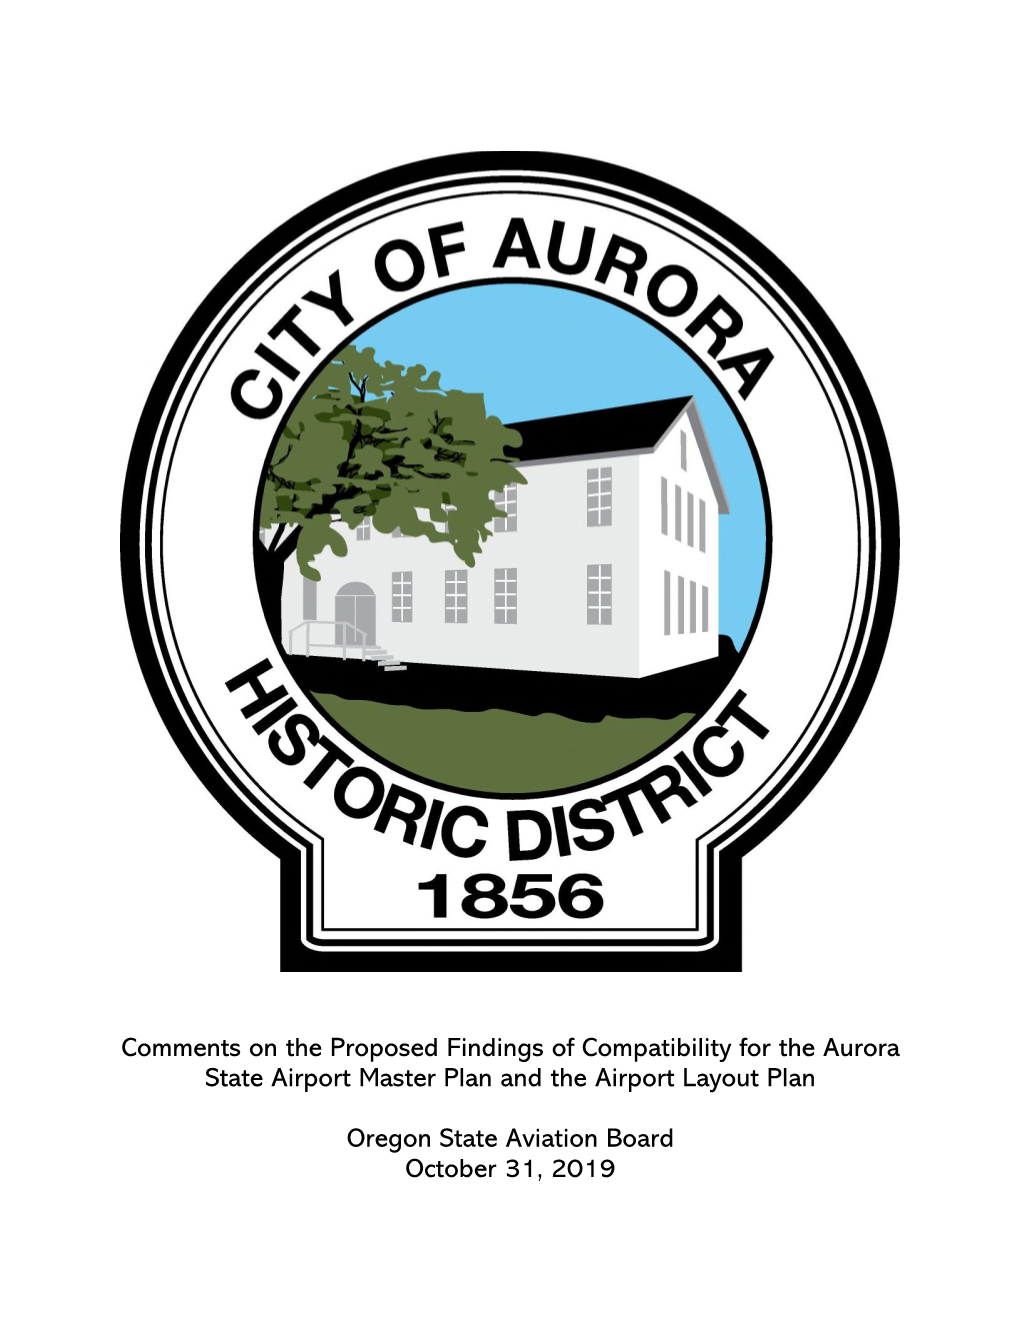 Comments on the Proposed Findings of Compatibility for the Aurora State Airport Master Plan and the Airport Layout Plan